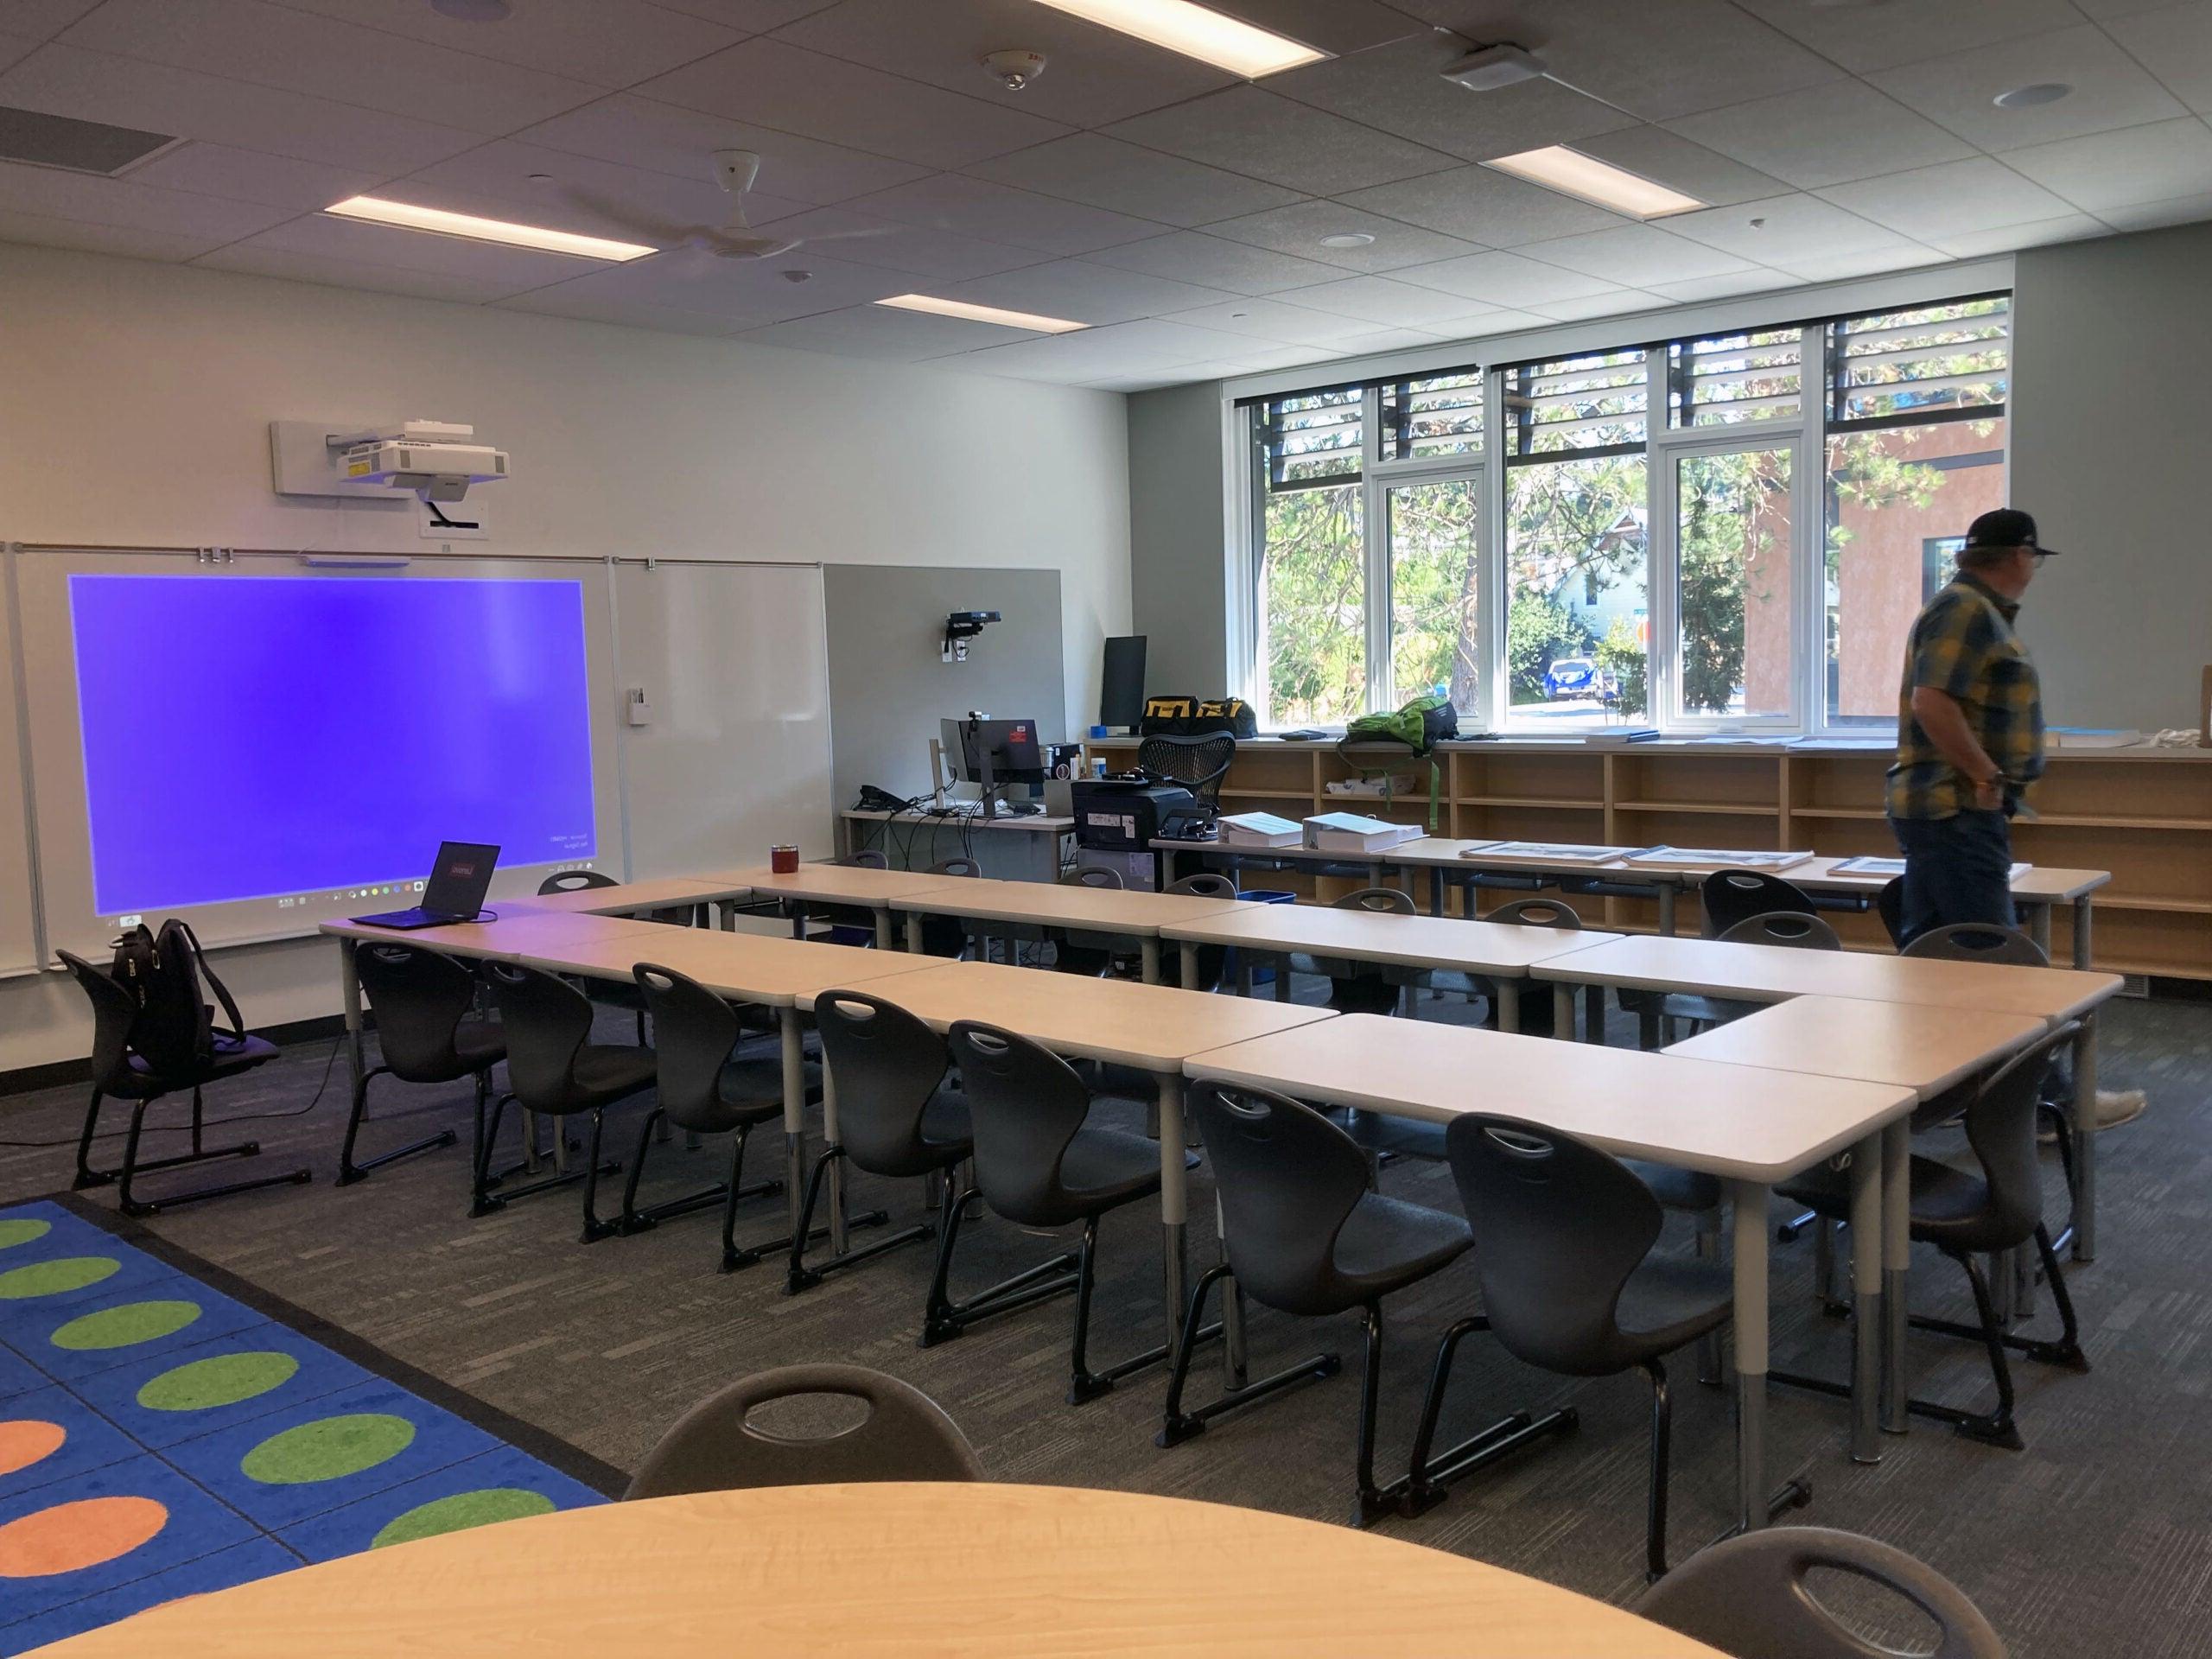 a classroom with tables set in a circle, windows on one wall with bookshelves below, a white board and projector on another wall